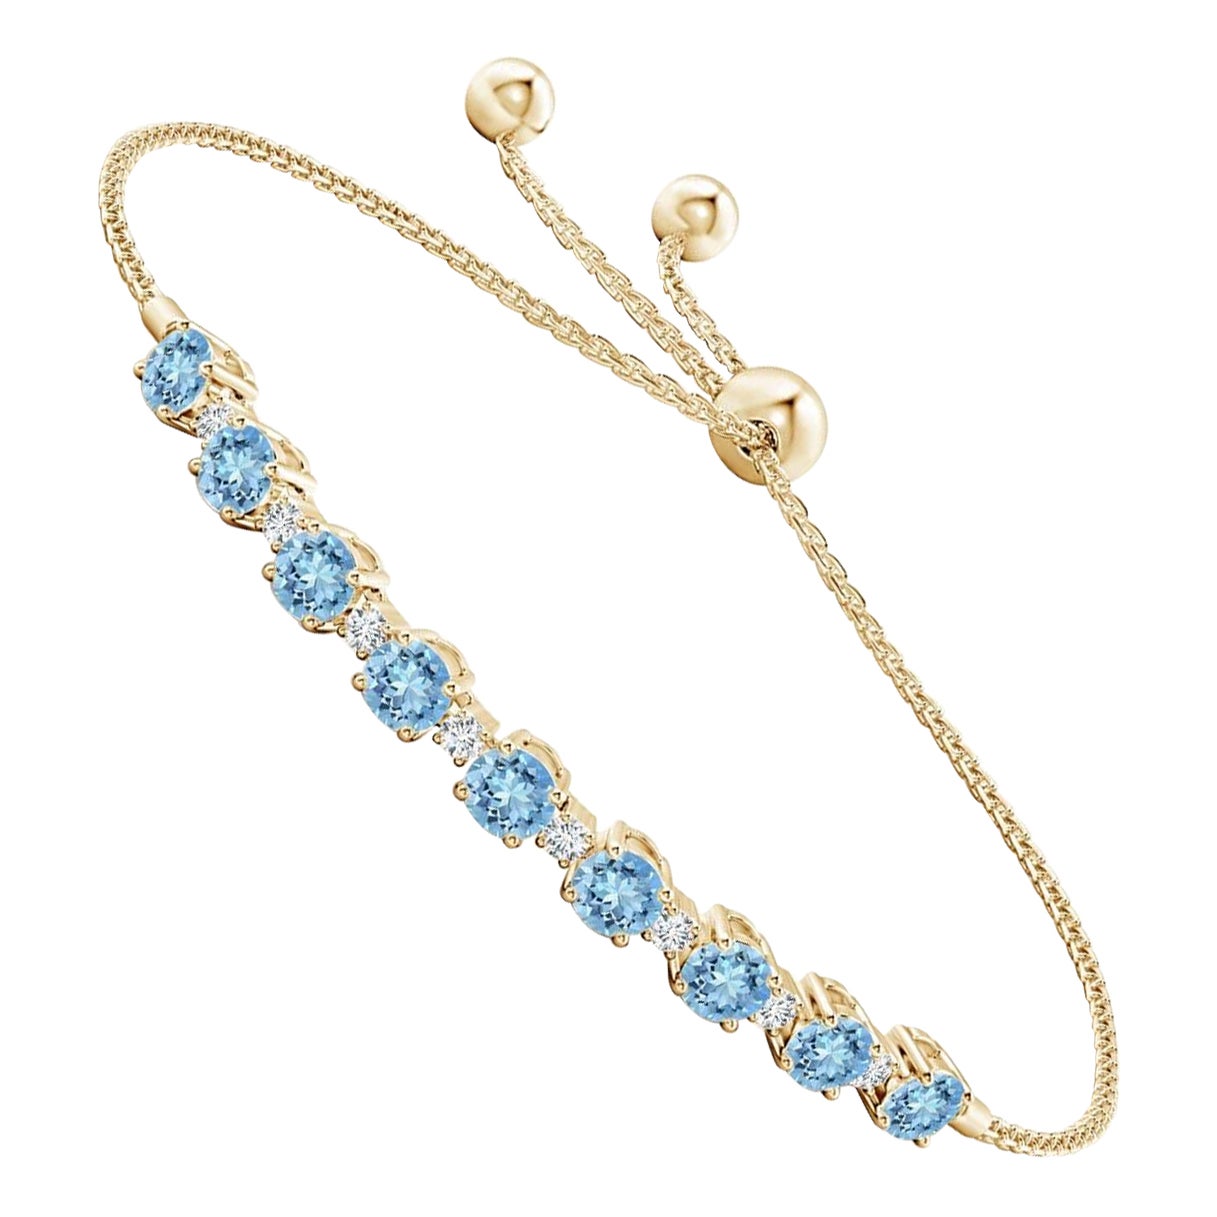 Natural 1.8ct Aquamarine and Diamond Tennis Bracelet in 14K Yellow Gold For Sale